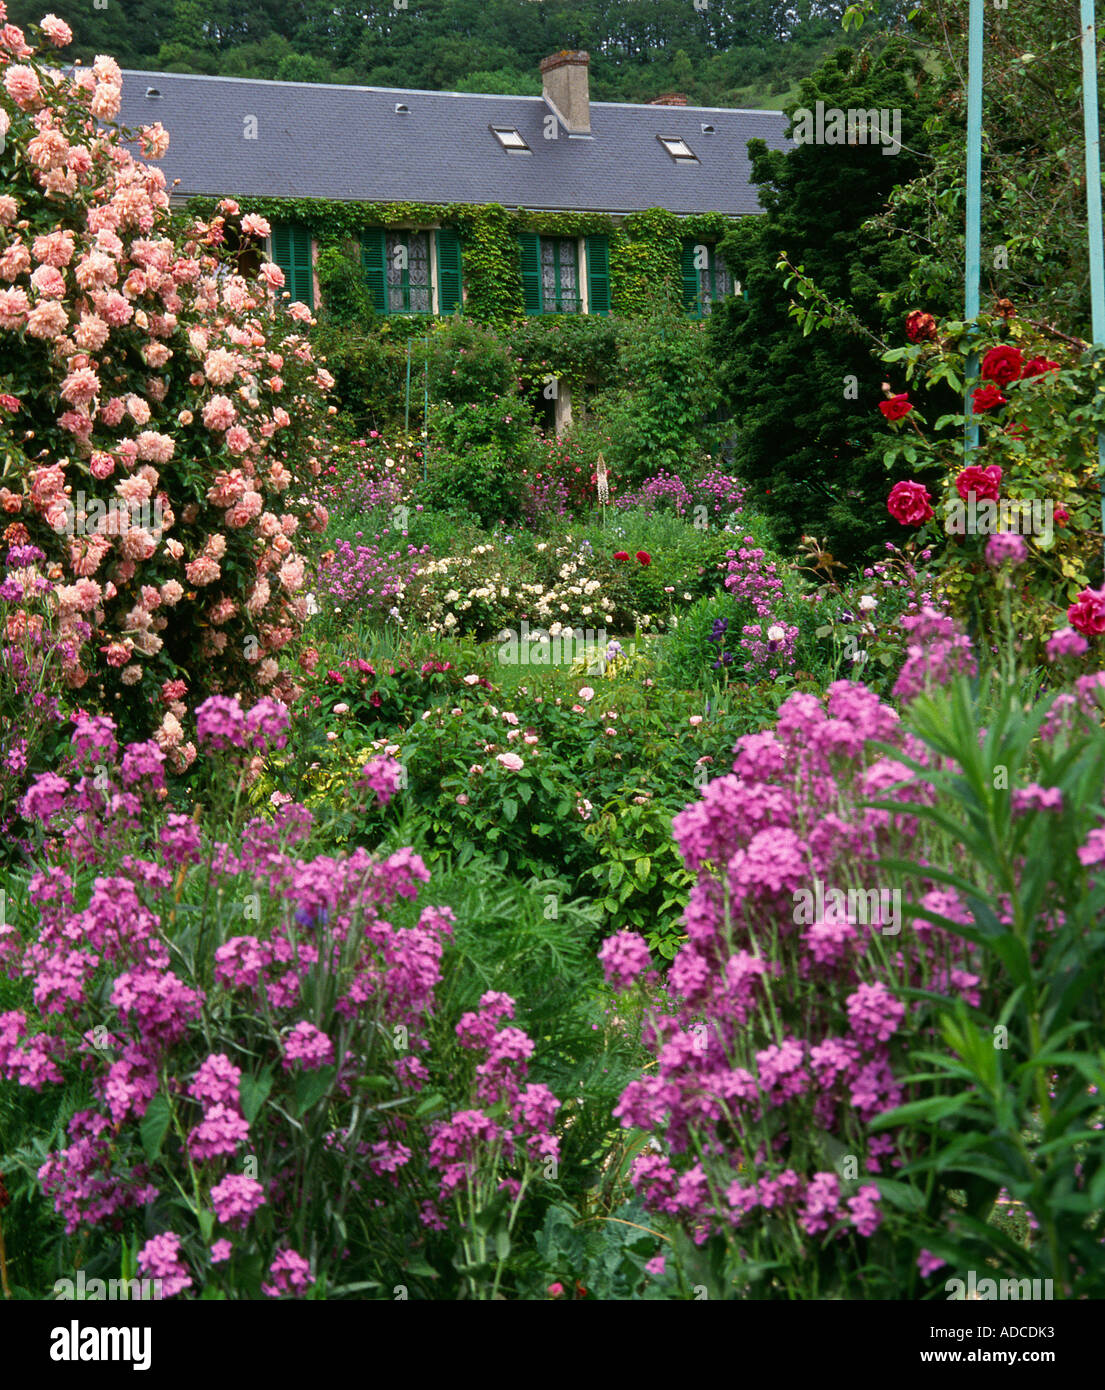 Monet's garden at Giverny in northern France Stock Photo